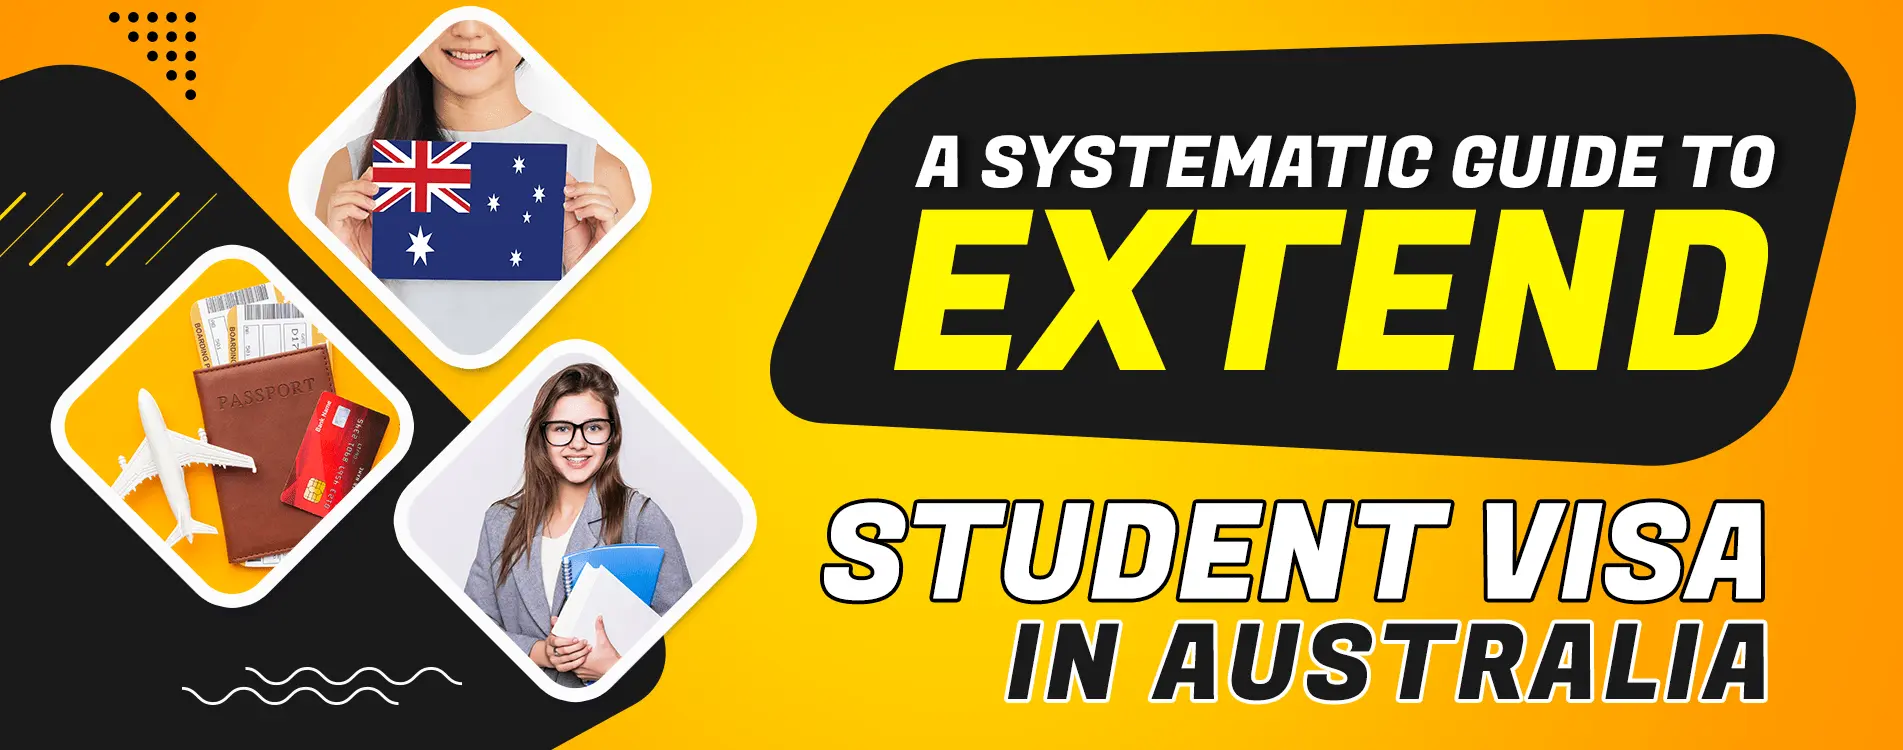 A Systematic Guide to Extending Your Student Visa in Australia